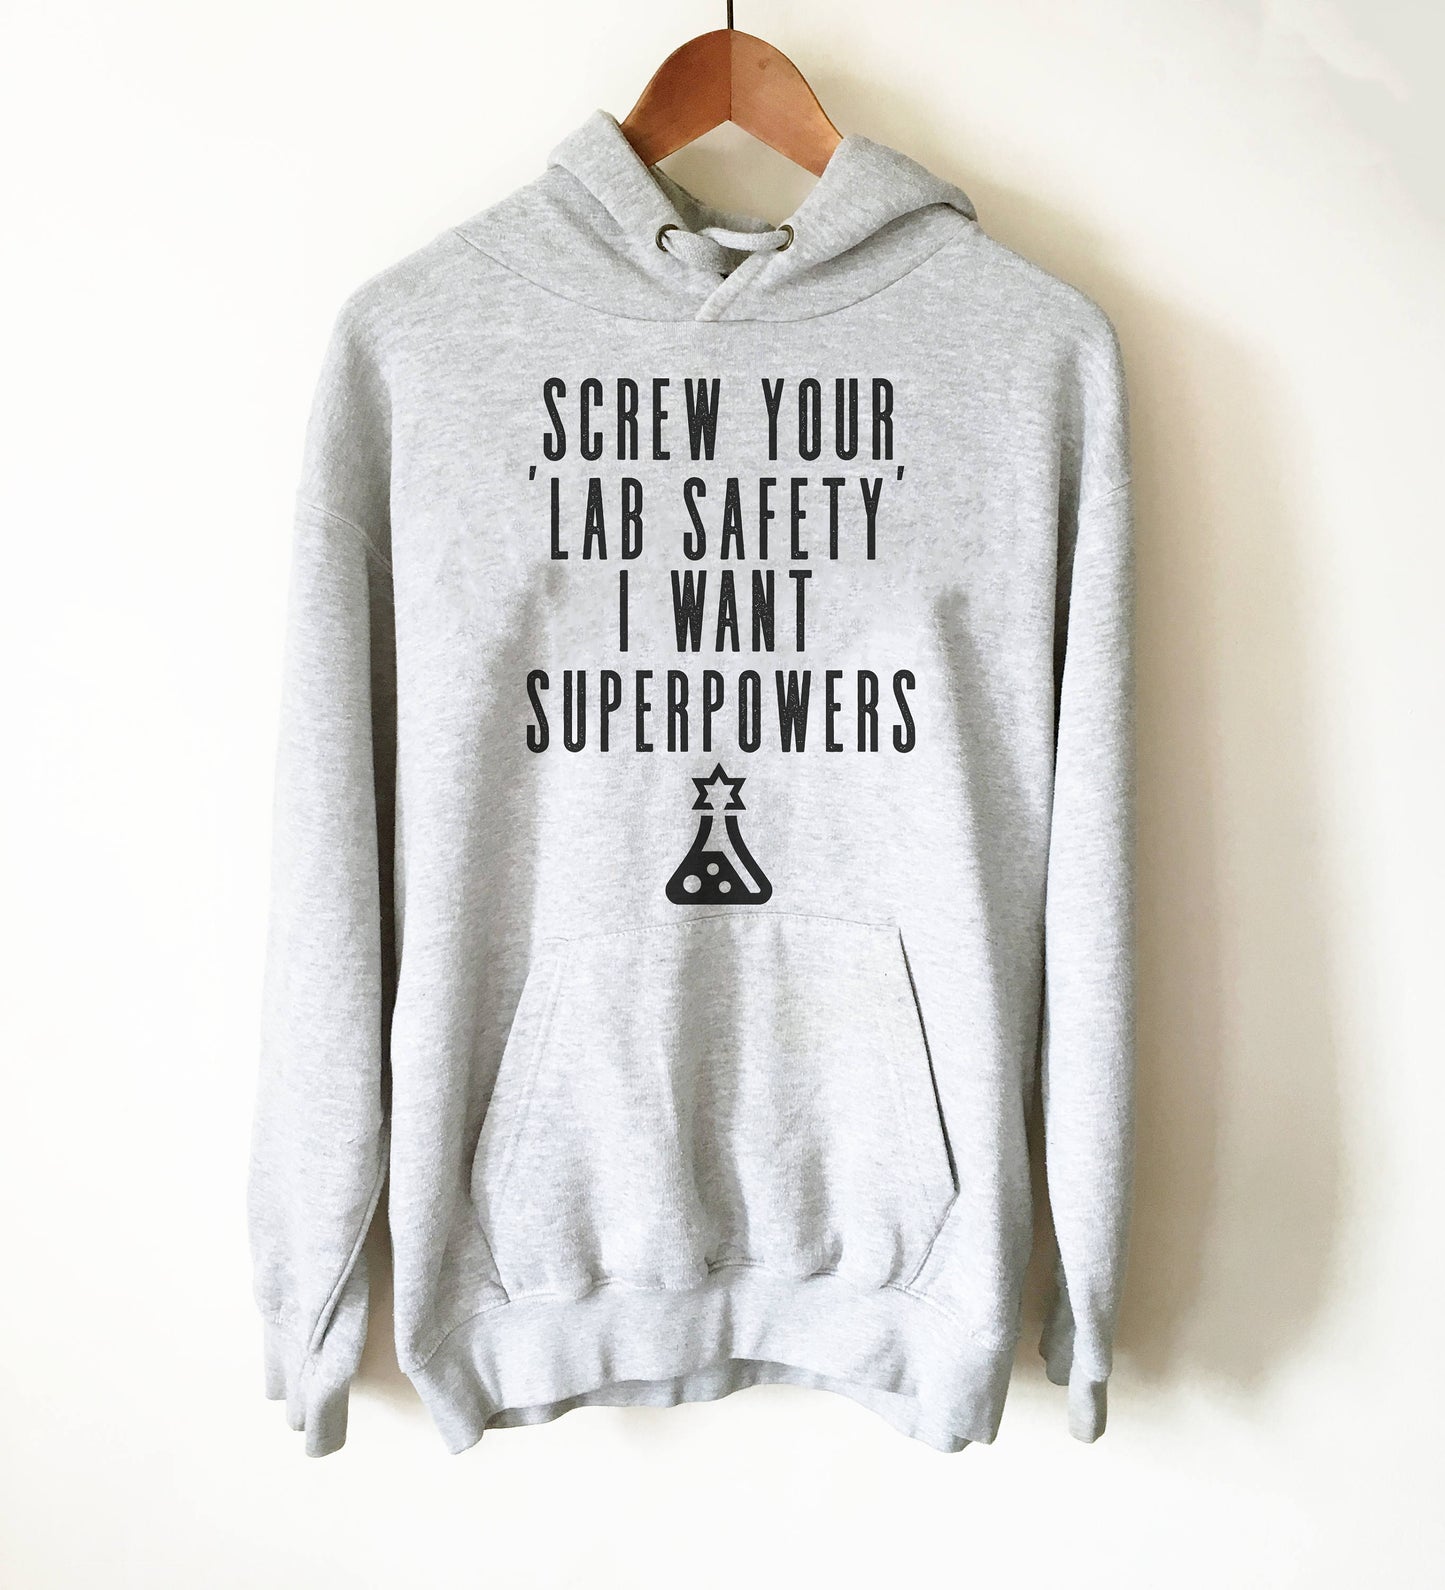 Screw Your Lab Safety I Want Superpowers Hoodie - Chemistry shirt, Science shirt, Chemistry gift, Chemistry teacher, Funny chemistry hoodie